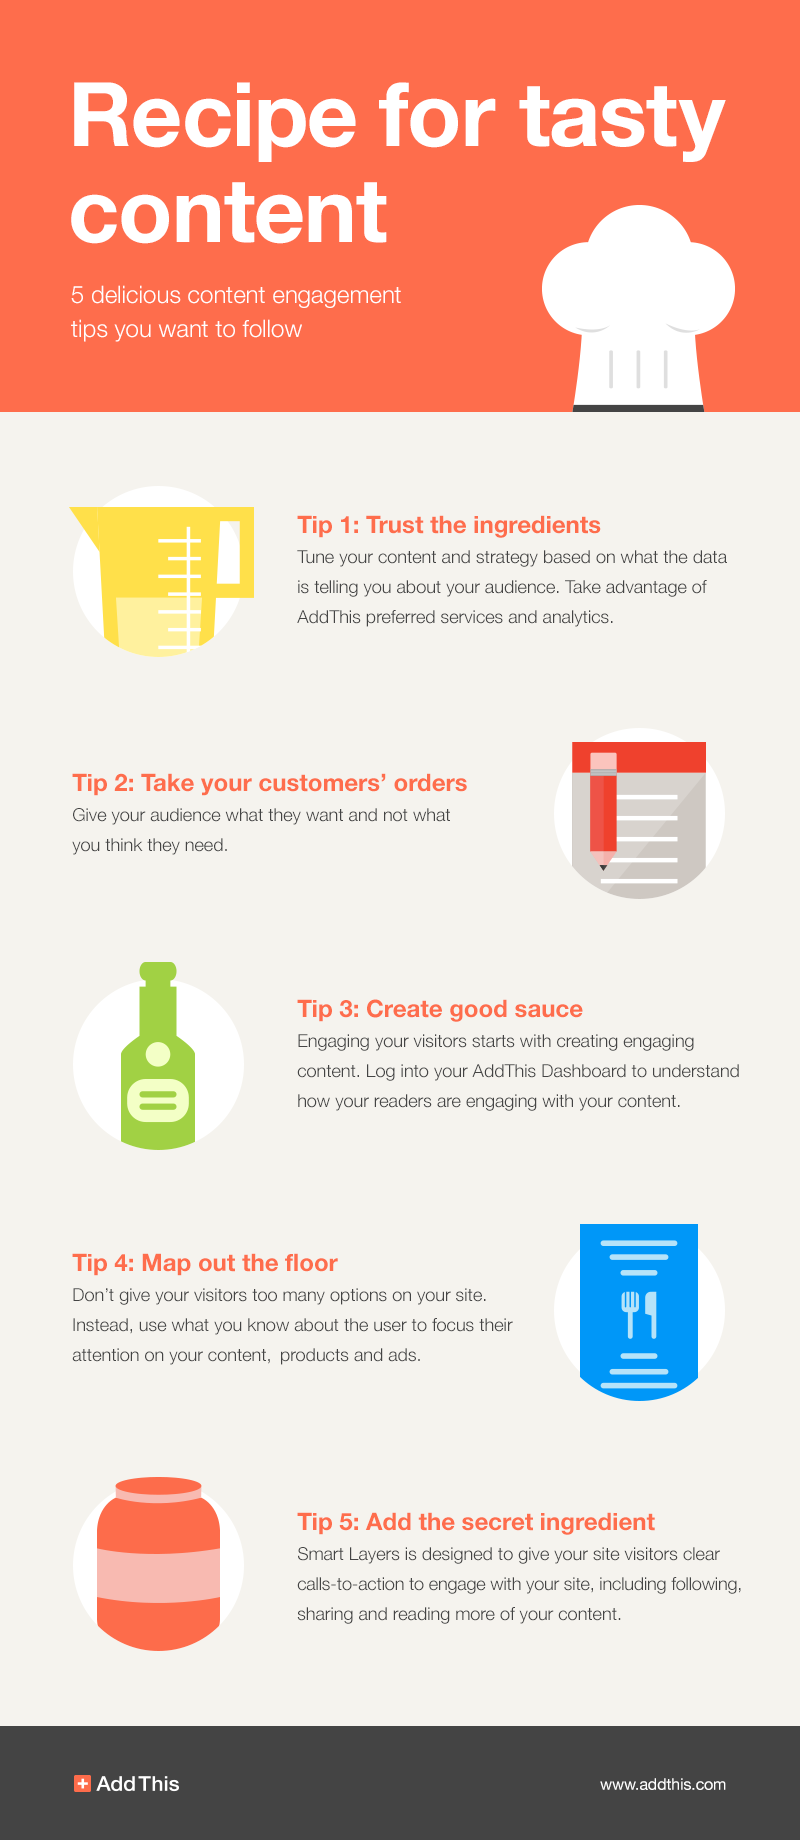 5_Delicious_Content_Engagement_Tips_Newsletter